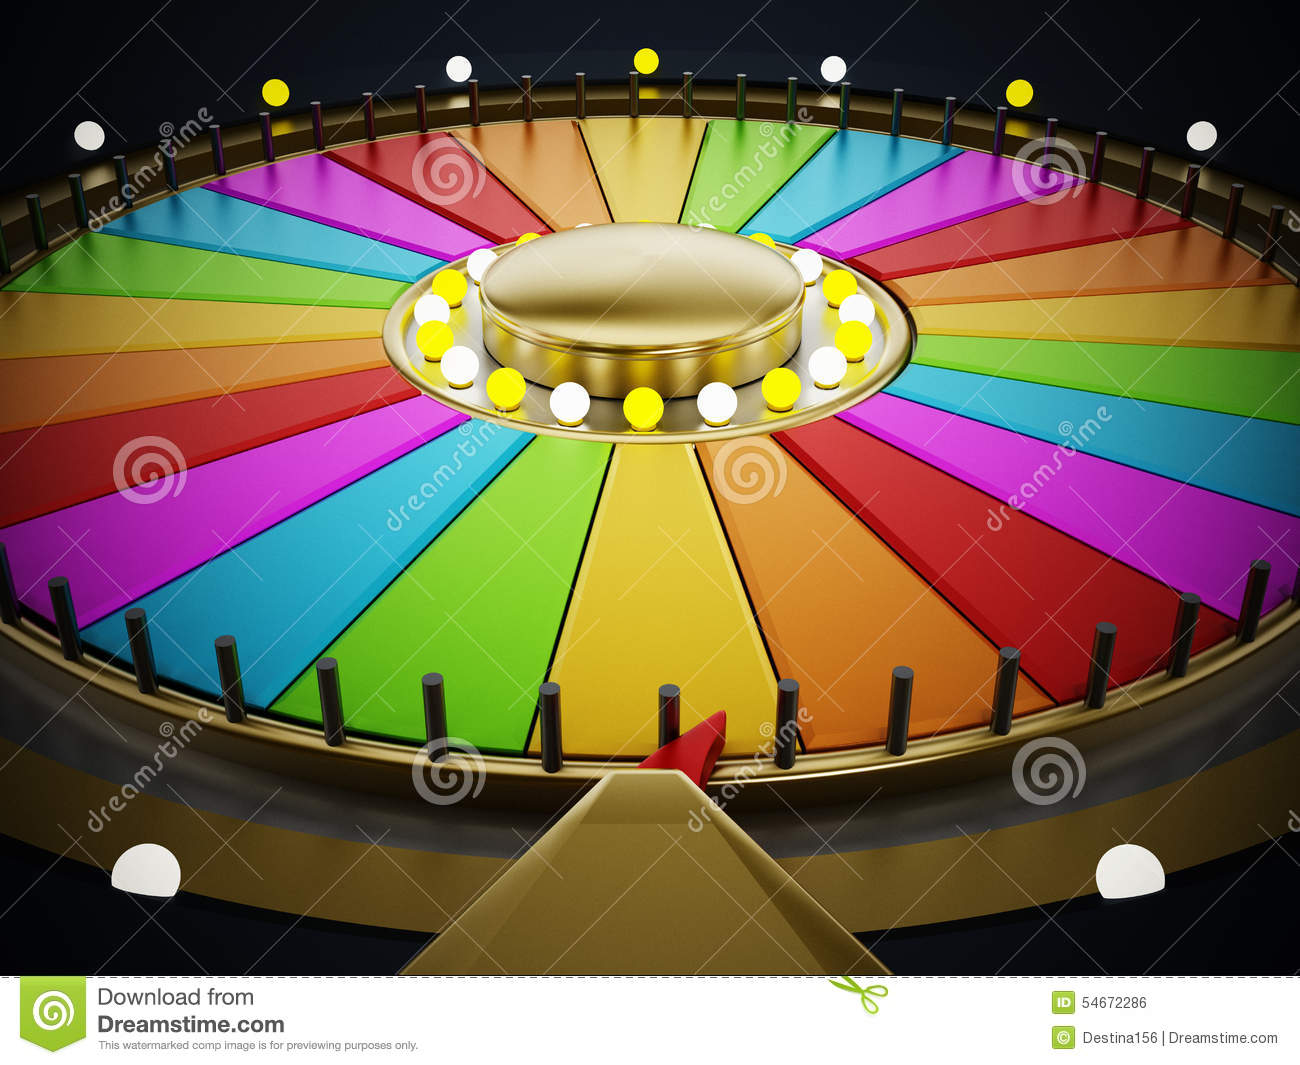 Prize Wheel With Empty Slices On Black Background 